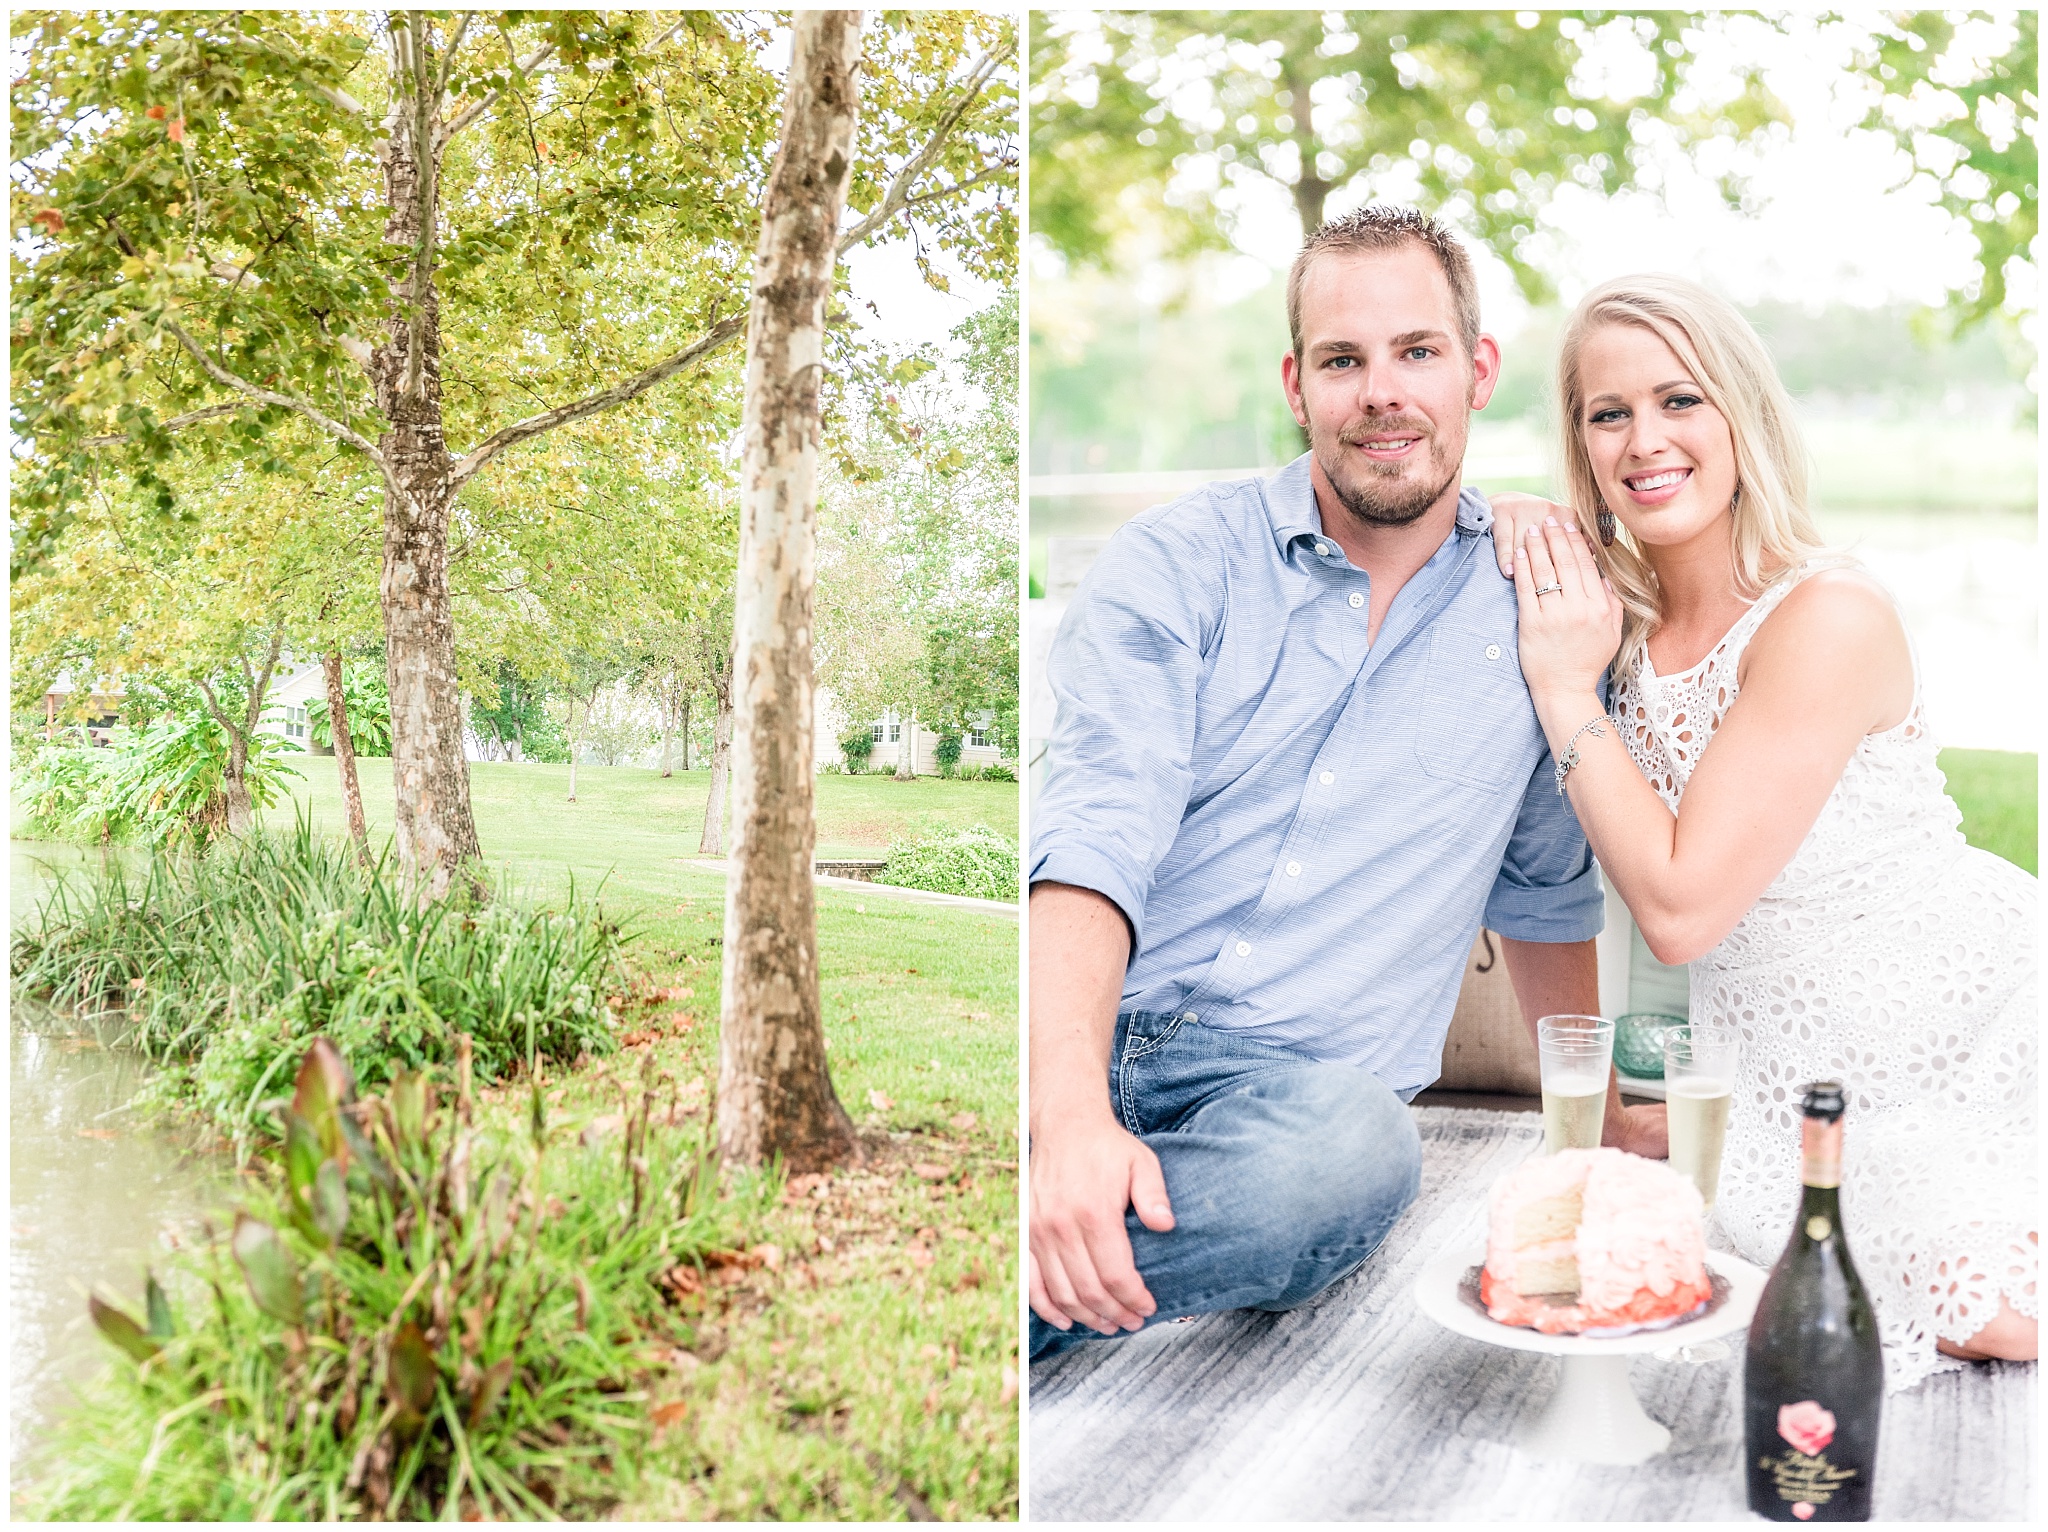 One Year Anniversary Session at The Orchards at Caney Creek Wharton TX 2016-09-29_0013